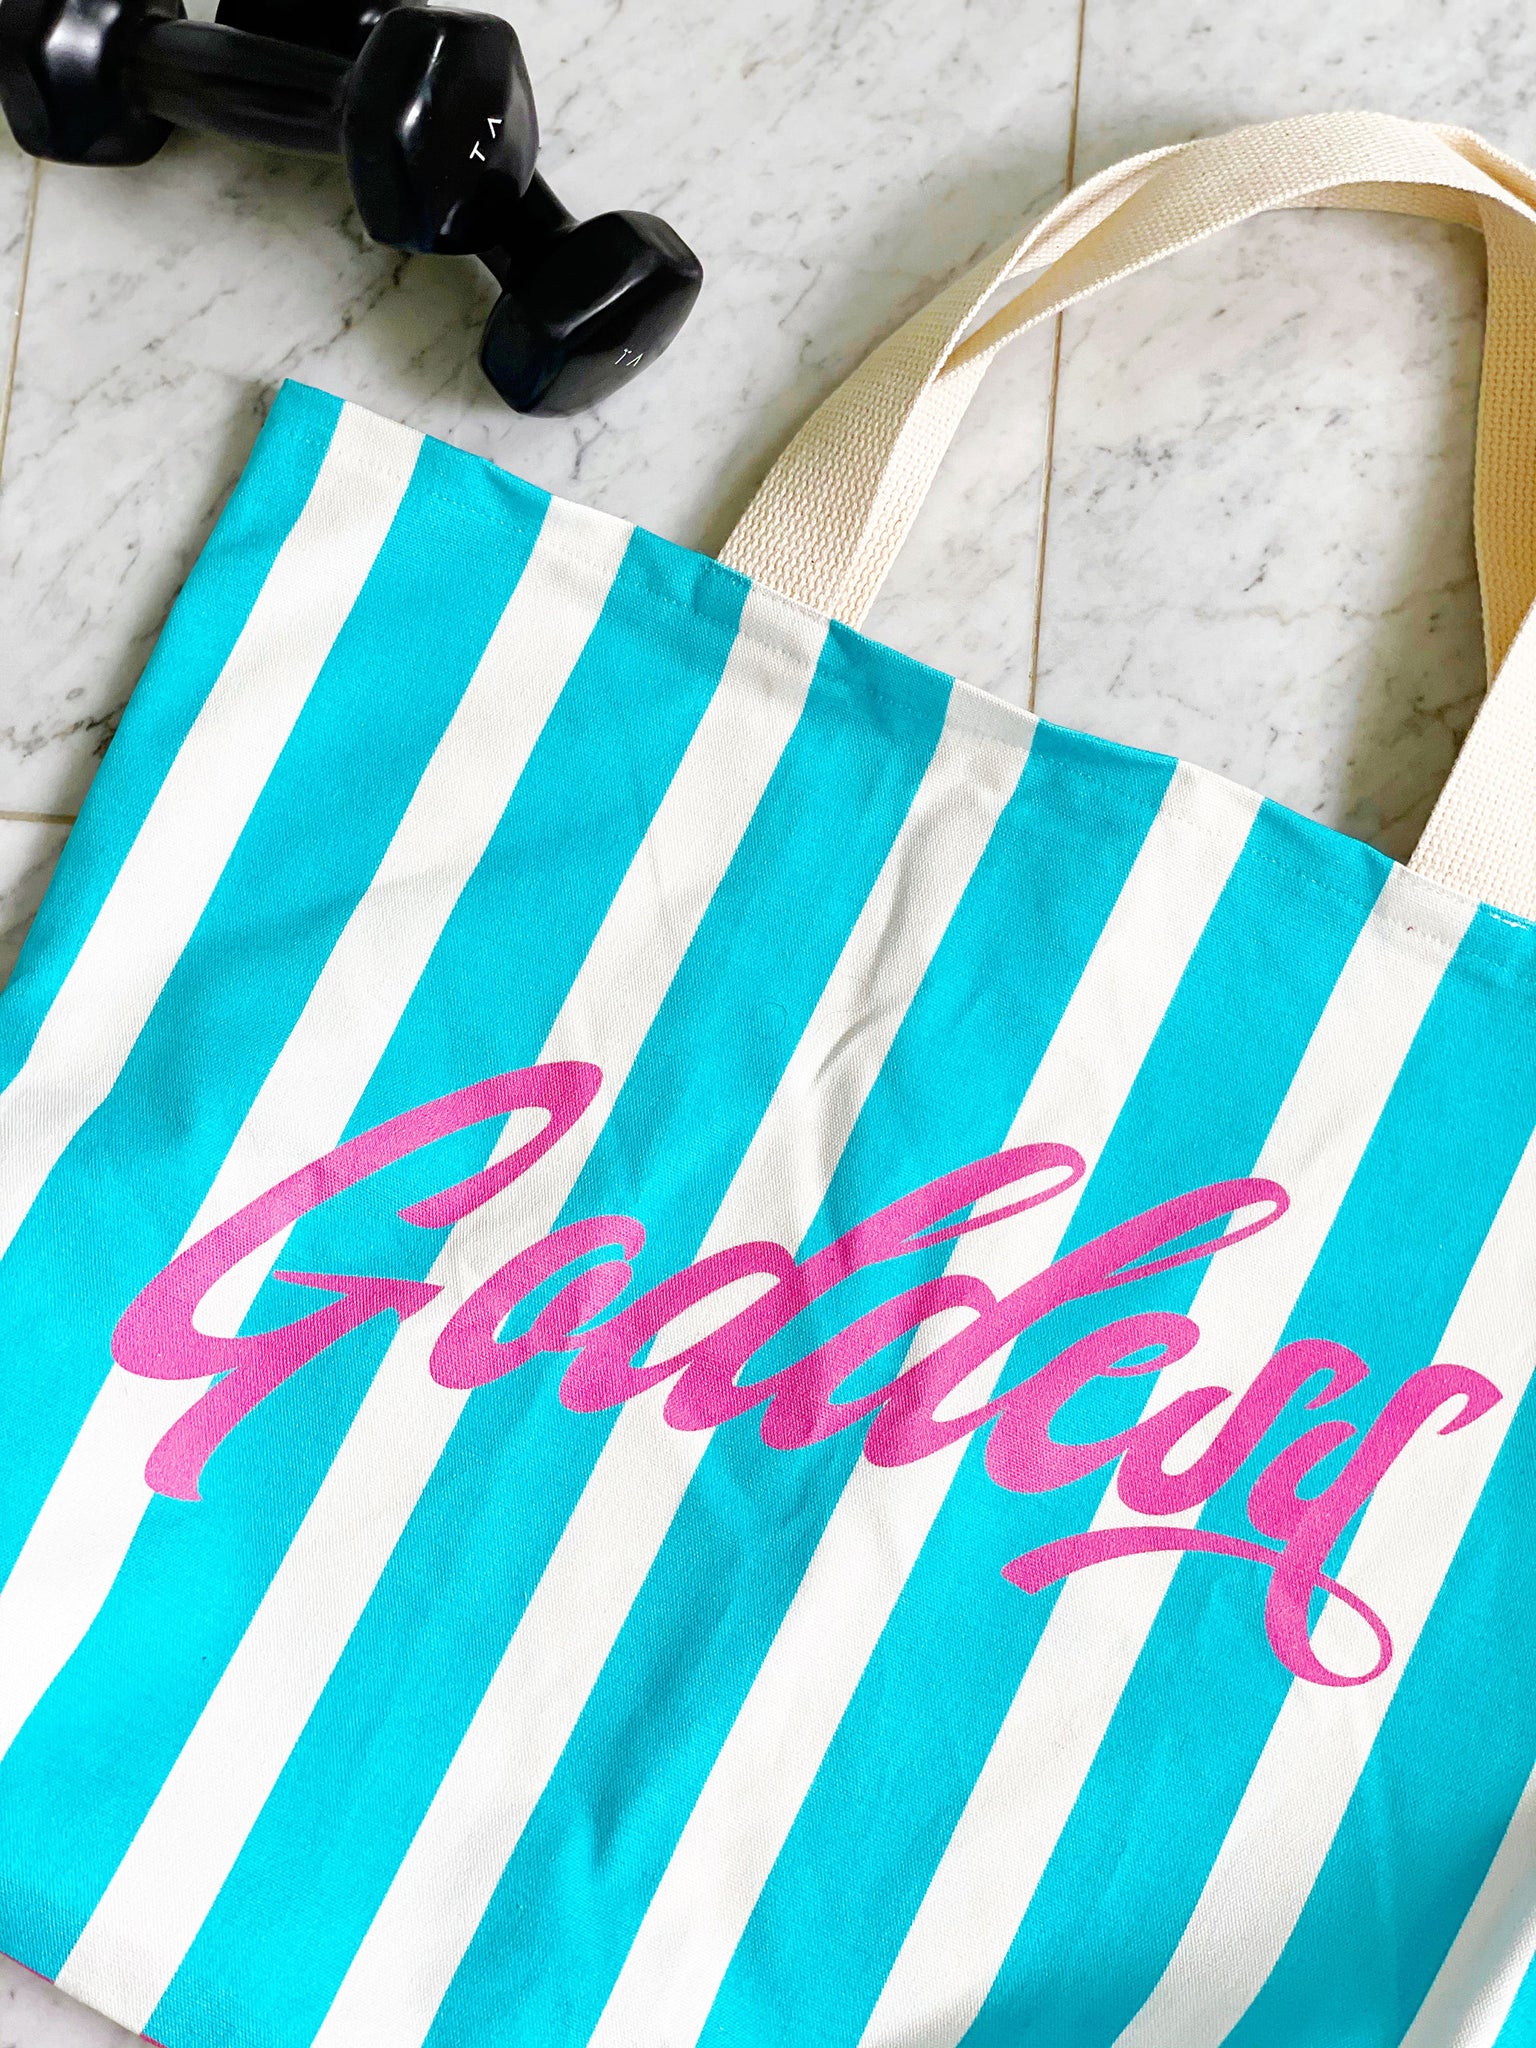 Our signature stripes luxe tote shown in a bold pink and blue with the word "Goddess" on the bag, features 2 interior pockets and a navy blue lining.